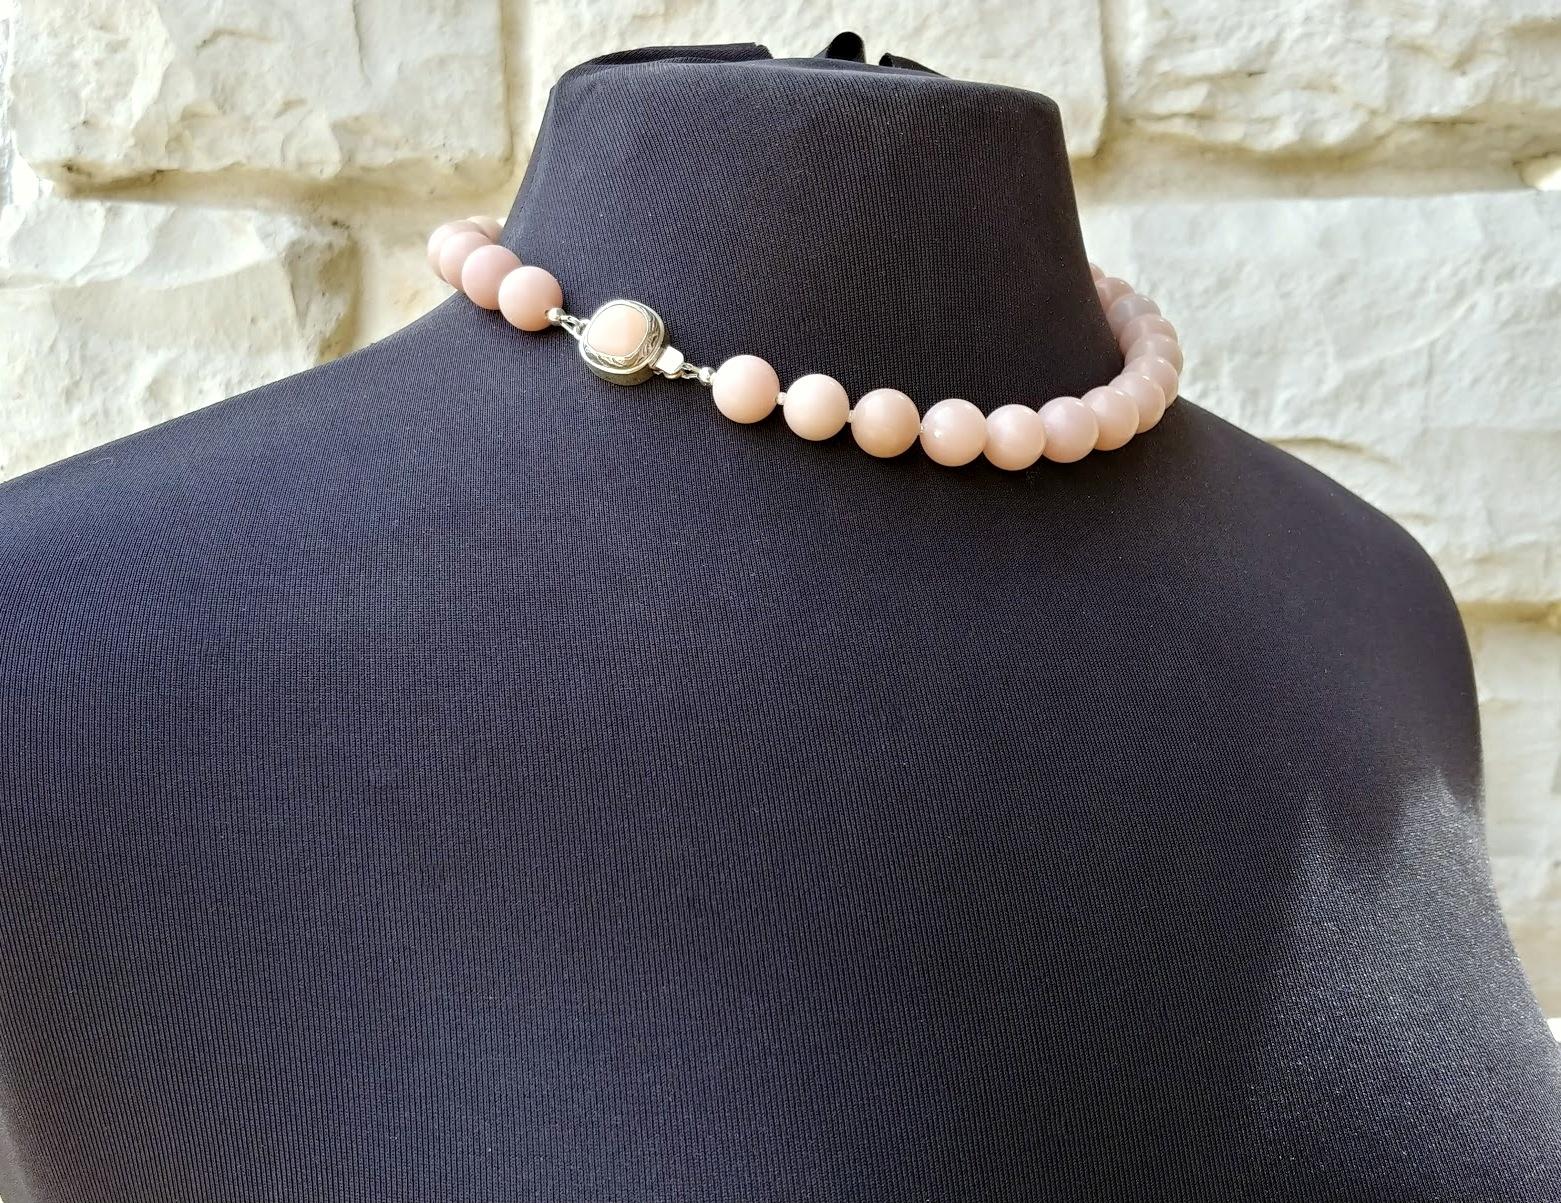 Very soft, incredibly delicate Pink Opal necklace in Art Deco style.
This necklace has a delightfully soft tone, and peach-pink opal has loving energy. In addition, this necklace alternates beads with 2 mm natural, high-quality freshwater pearls for